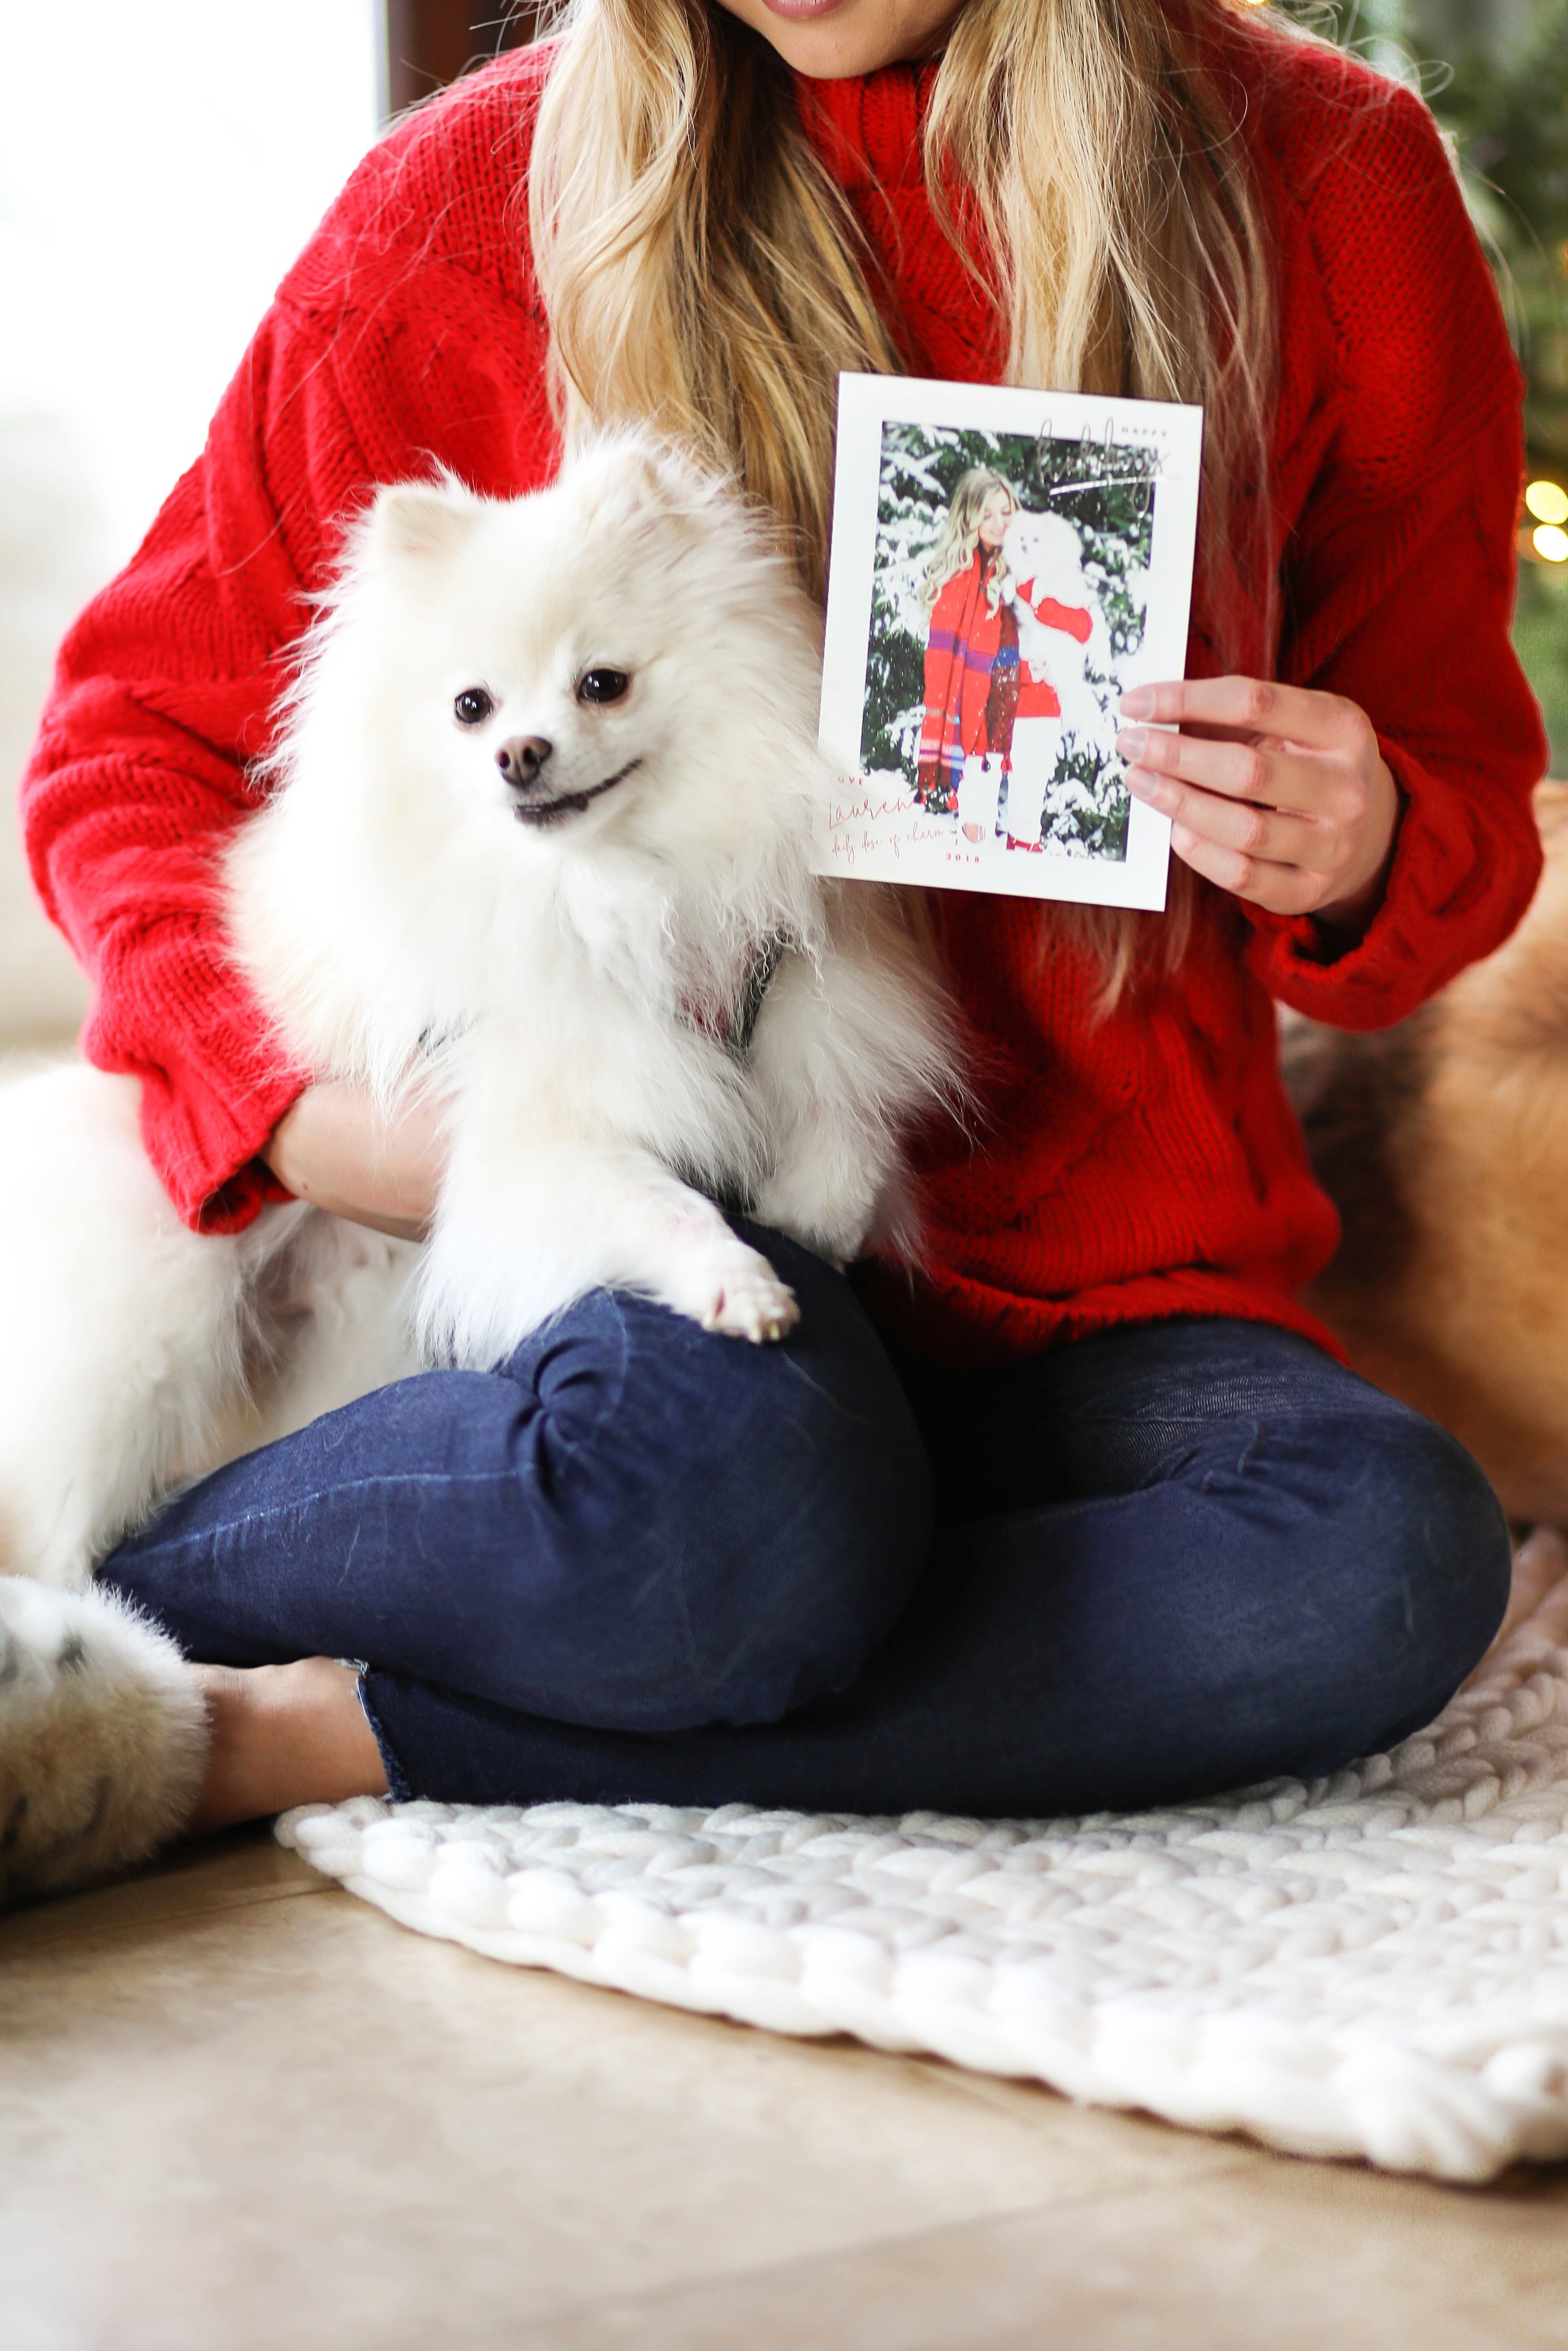 Christmas photos from Minted! The cutest holiday photos with my white pomeranian and German shephard! Dog holiday pictures are so cute! I am wearing this cute cable knit red sweater and beanie. All details on fashion blog daily dose of charm by lauren lindmark